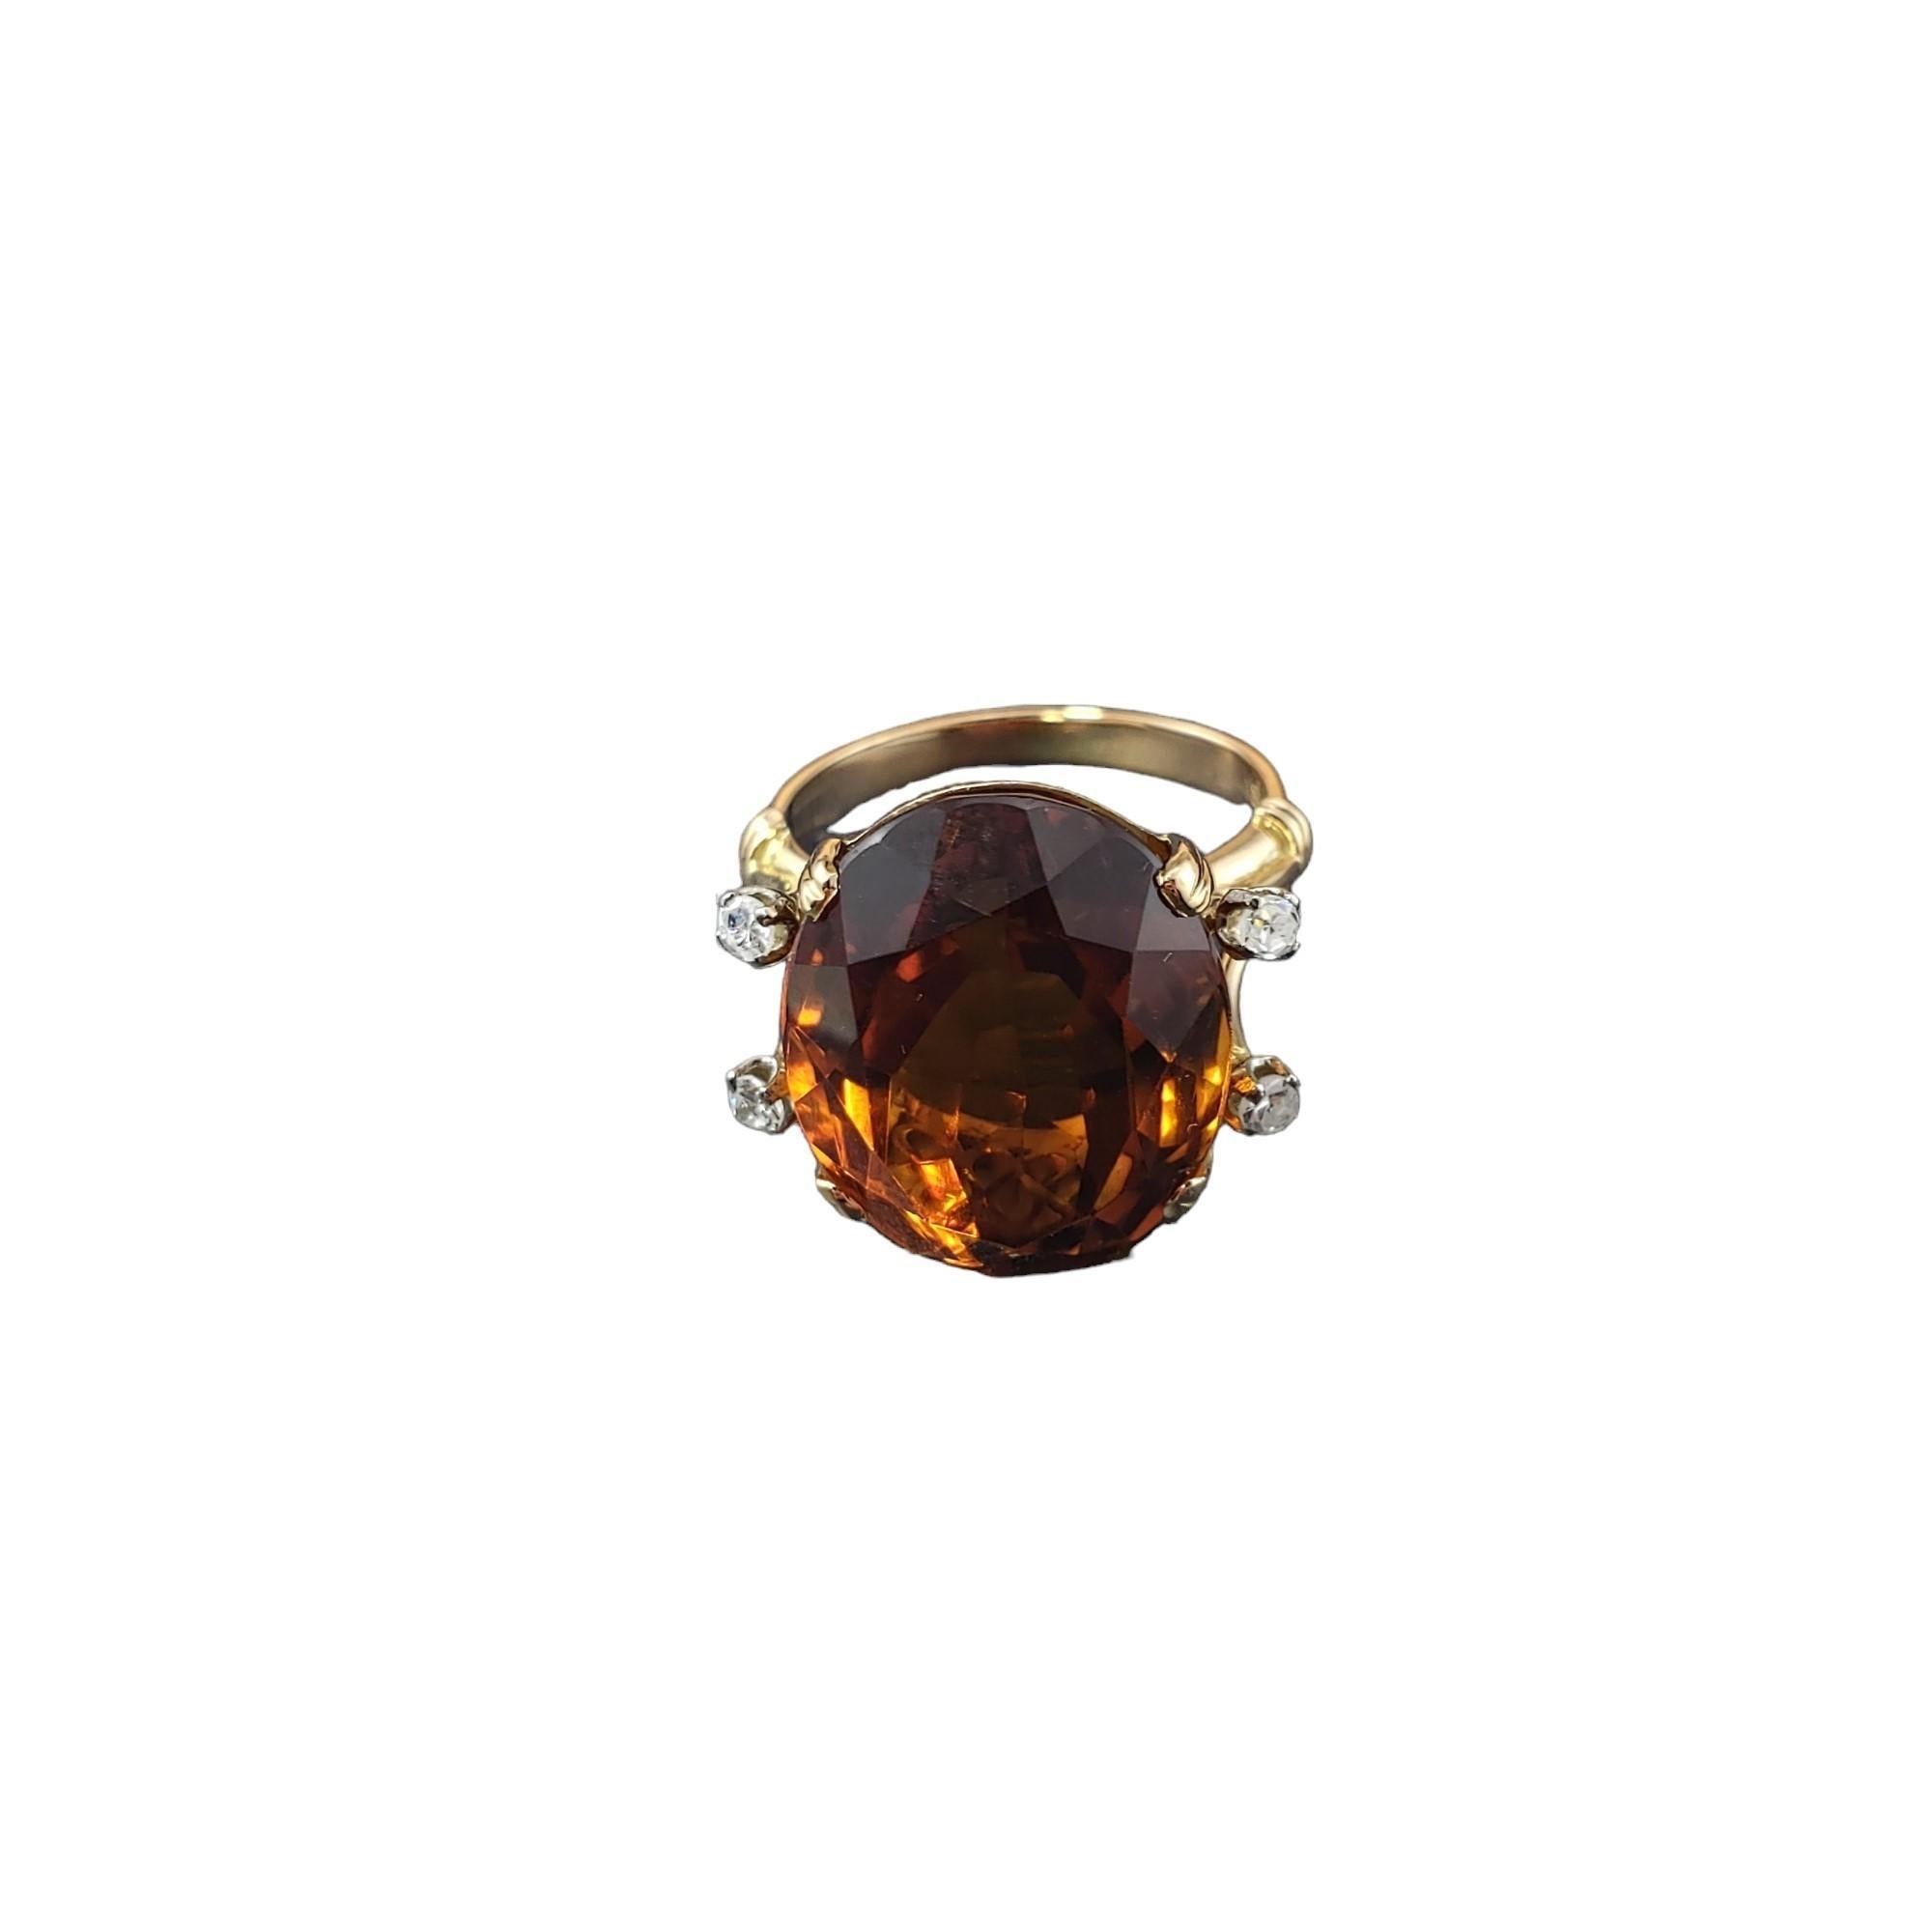 18K Yellow Gold Citrine and Diamond Ring Size 5.25 JAGi Certified-

This stunning ring features one oval citrine quartz stone (16 mm x 13.5 mm) and four round single cut diamonds set in 18K yellow gold.  

Shank: 2 mm.

Citrine weight: 11.82